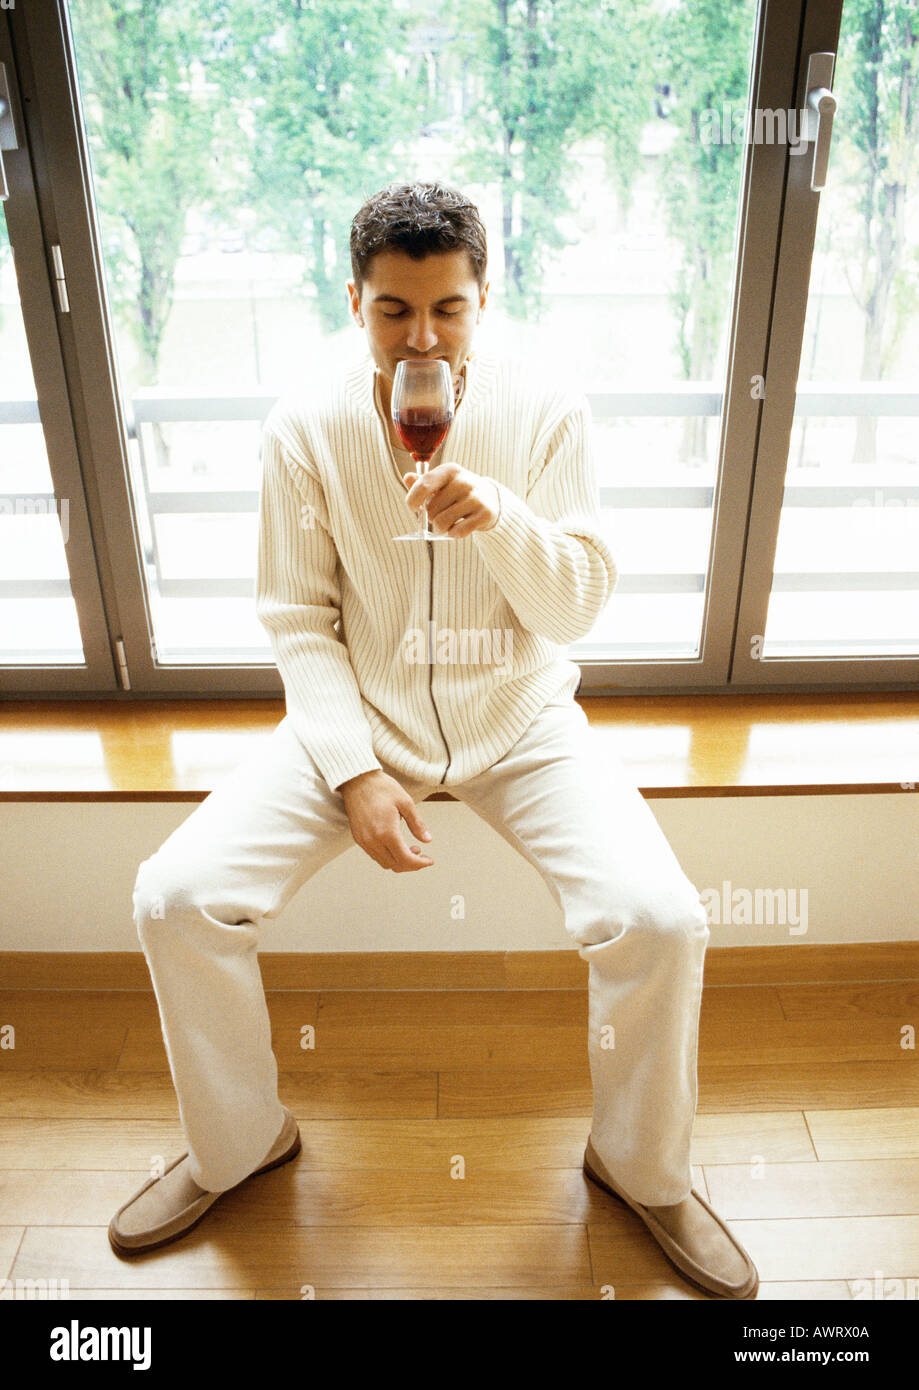 Man sitting in front of window, drinking wine Stock Photo